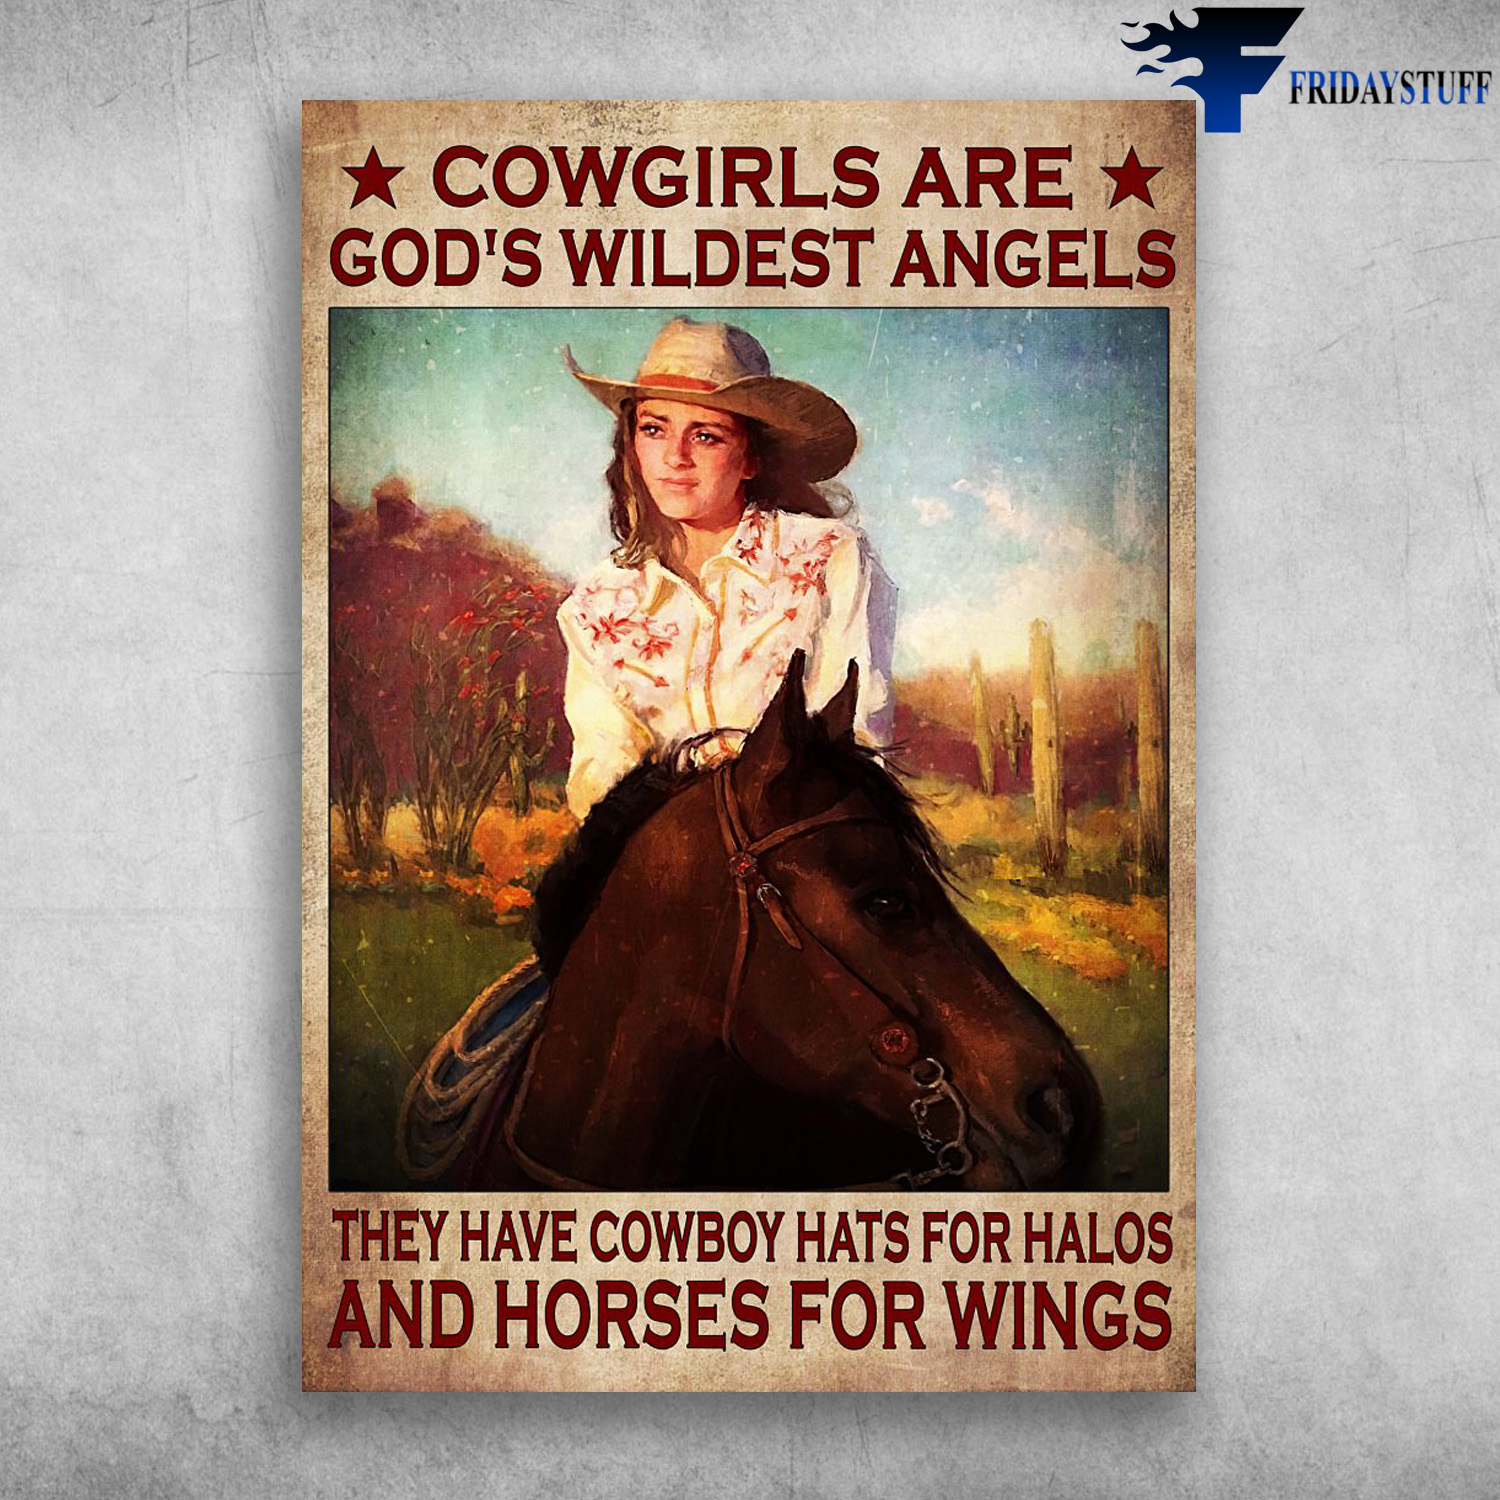 Cowgirl Riding Horse - Cowgirls Are God's Wildest Angels, They Have Cowboy Hats For Halos, And Horses For Wings